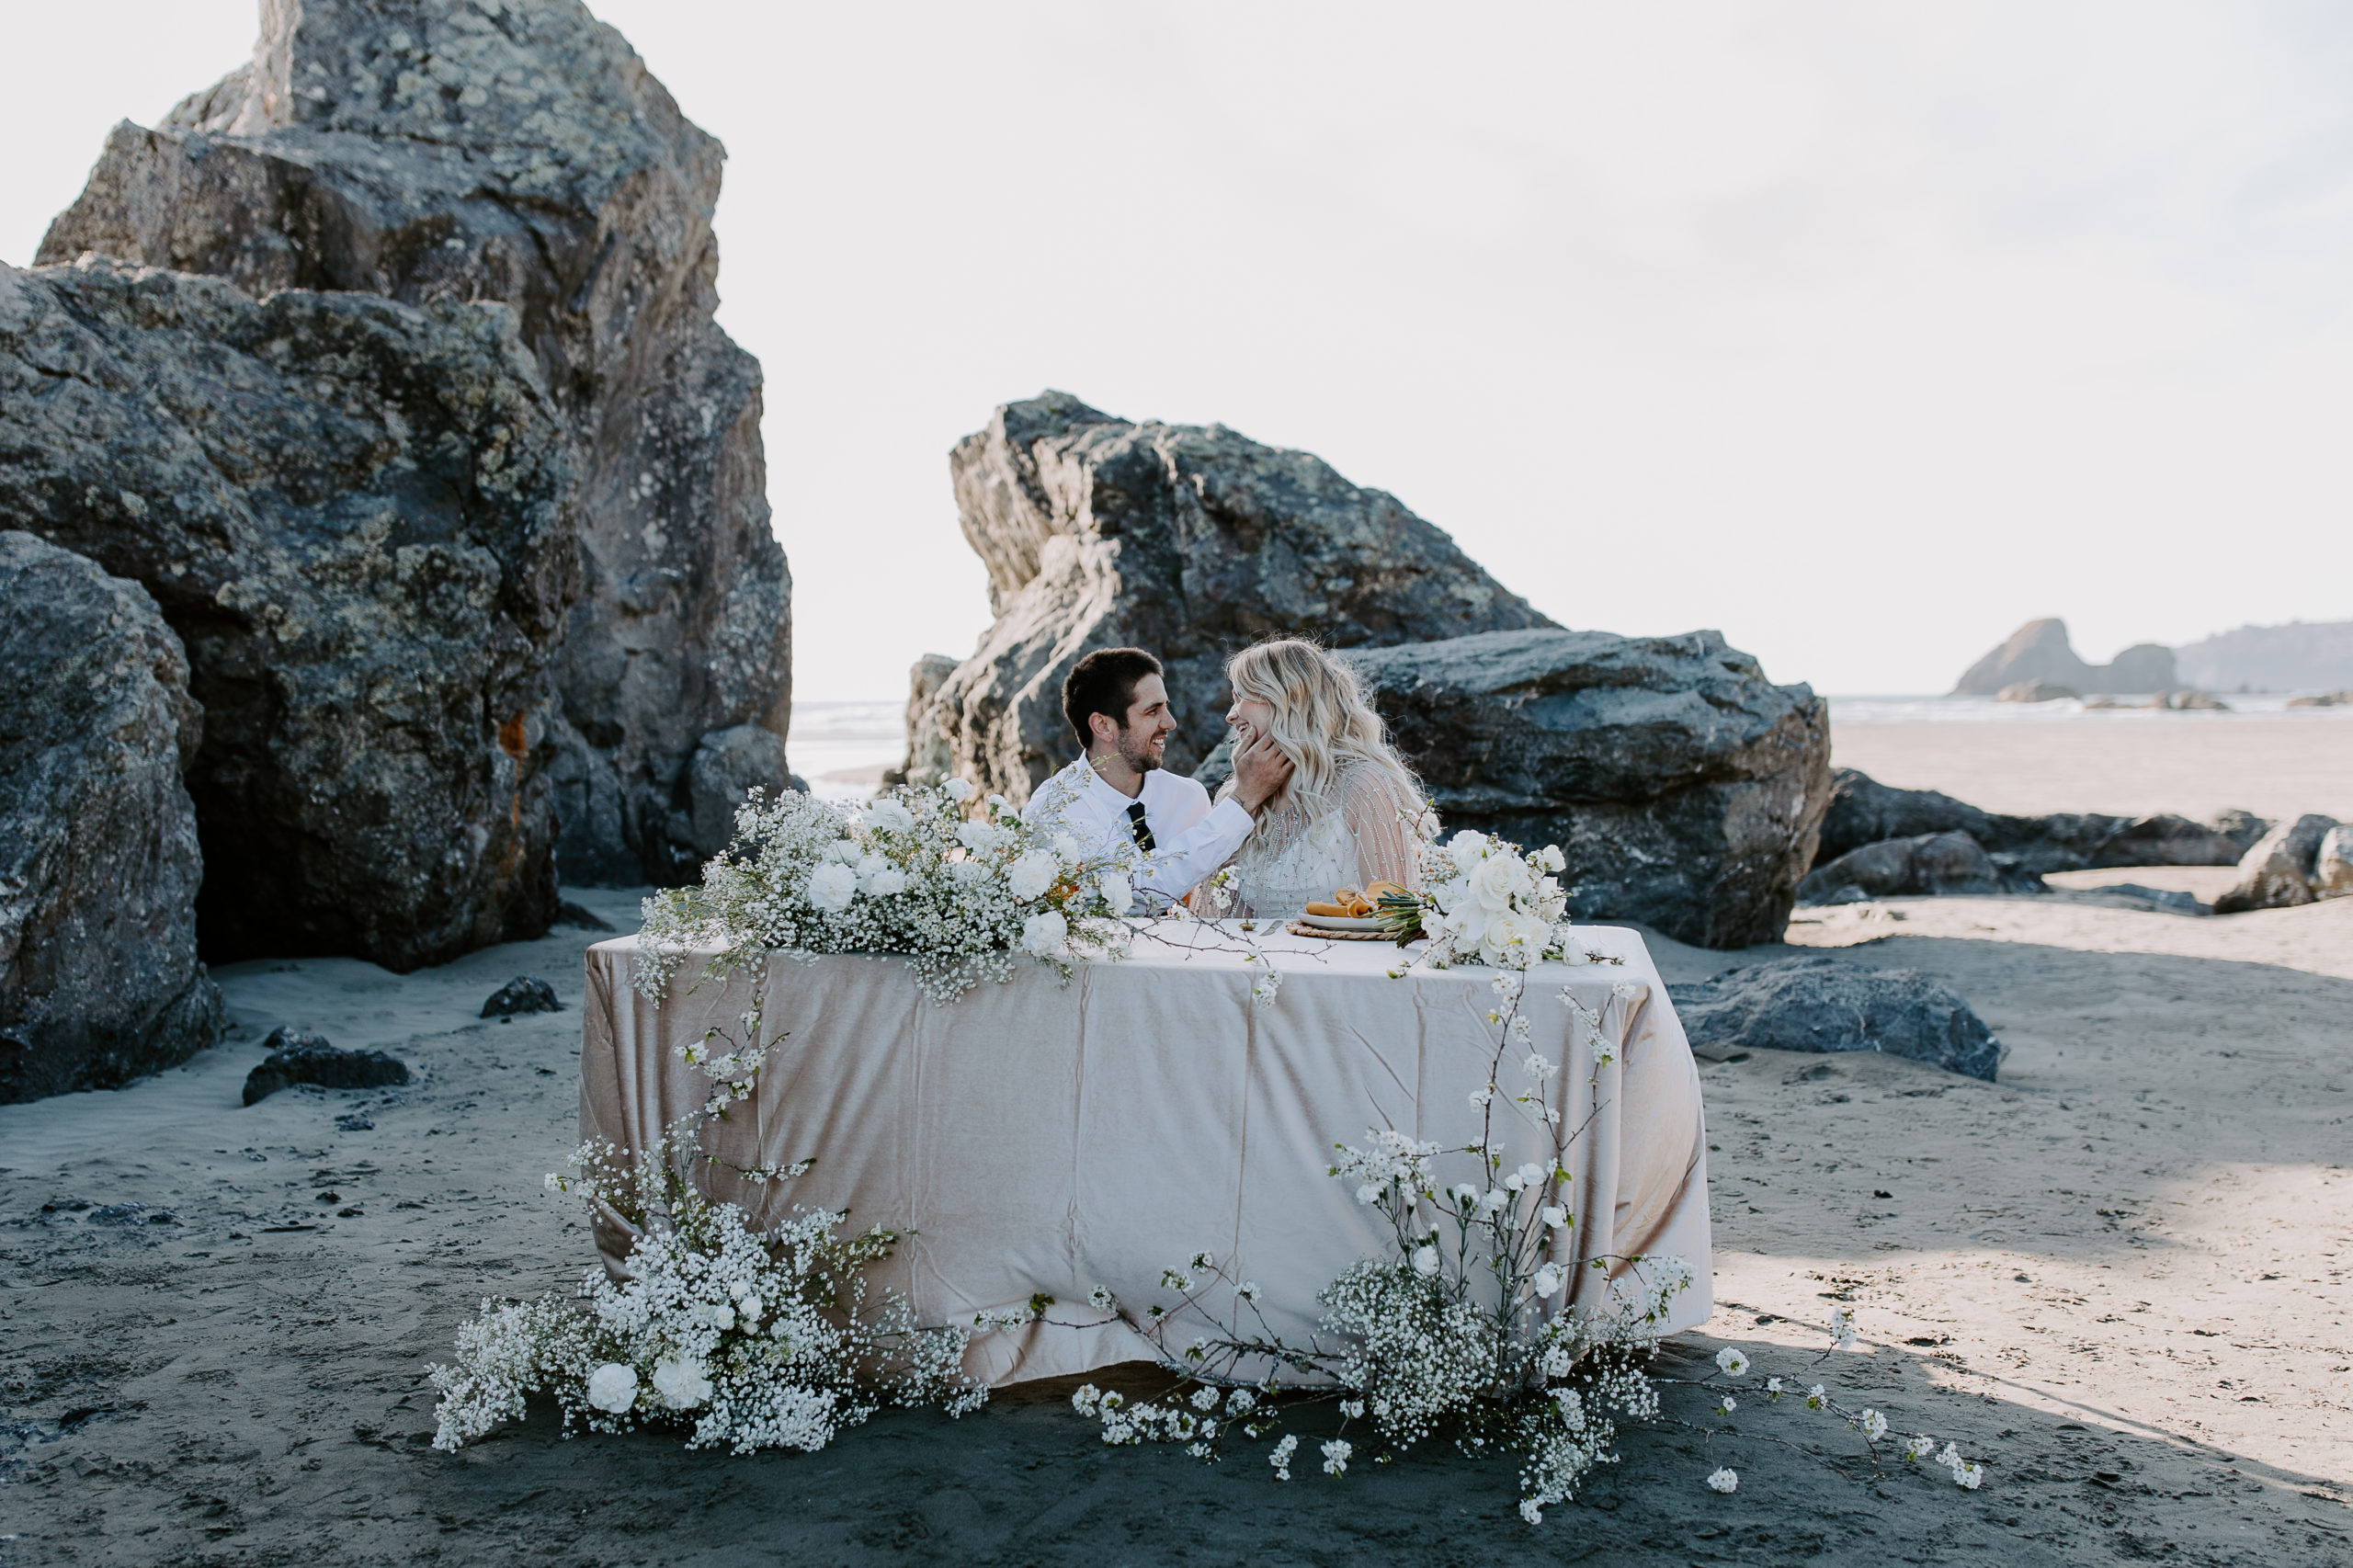 A newly wed couple sitting at their wedding table during their coastal micro wedding in Northern California